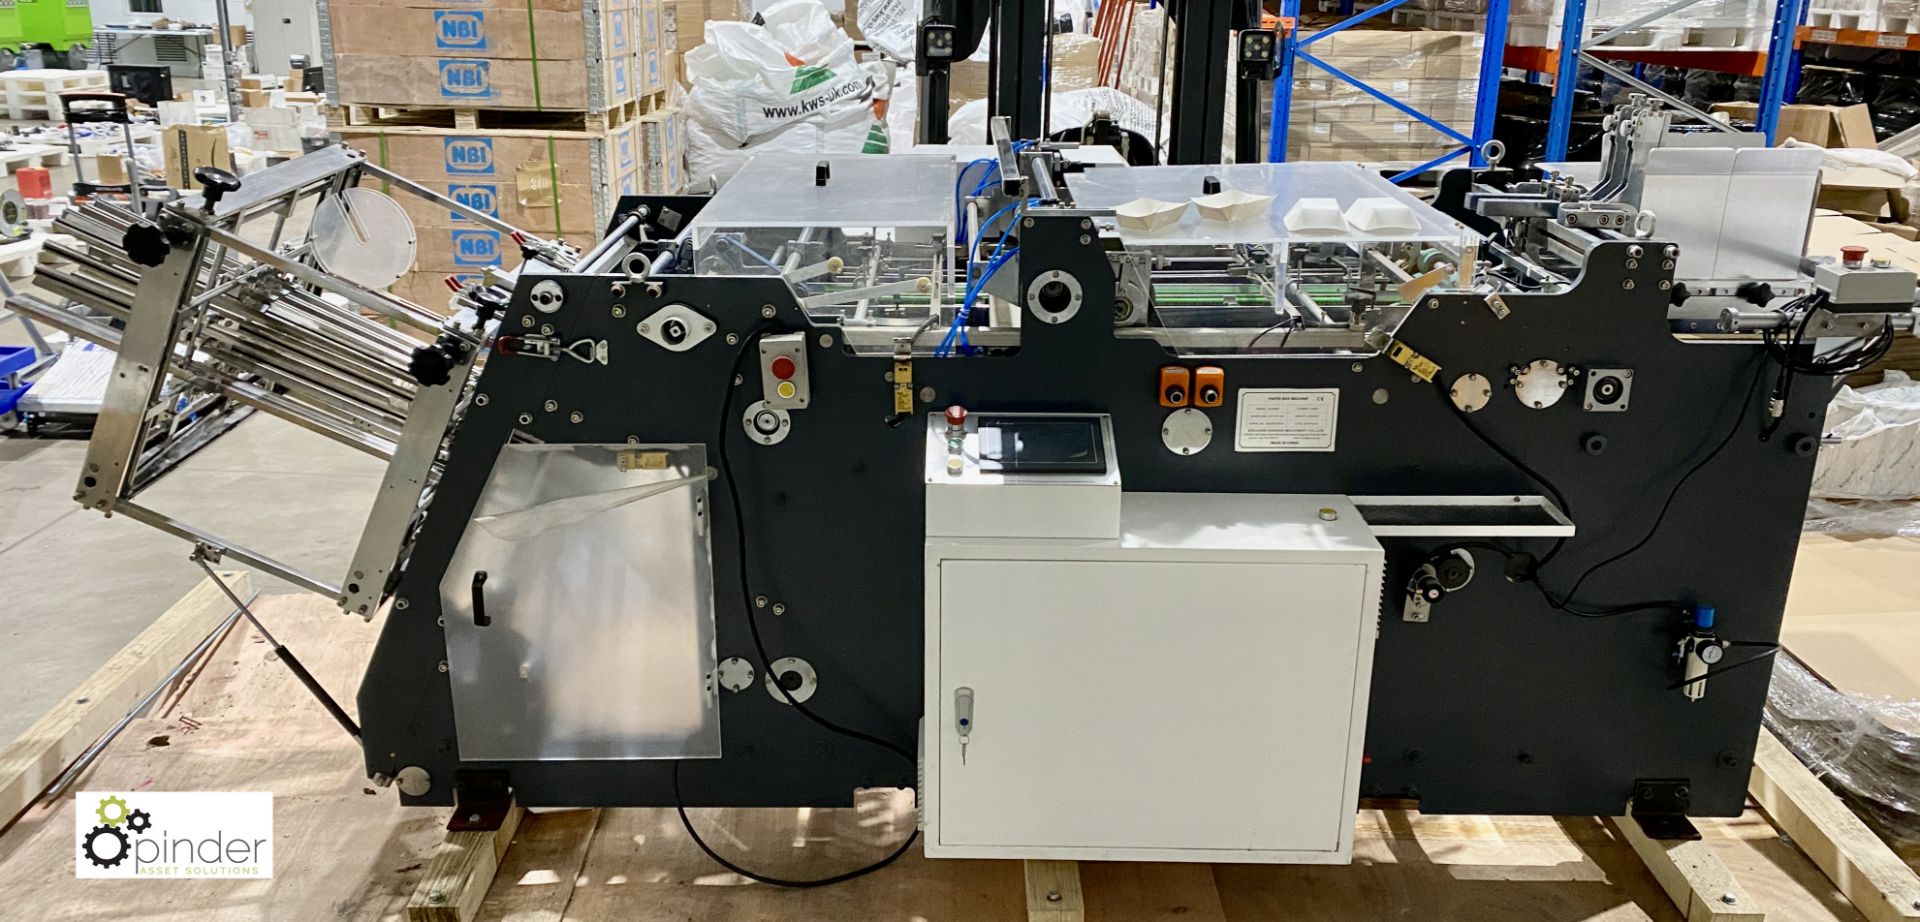 Zhejiang Guohao QH-9905 Paper Box/Tray Forming Machine, year 2019, serial number QC19SC0910 - Image 3 of 17